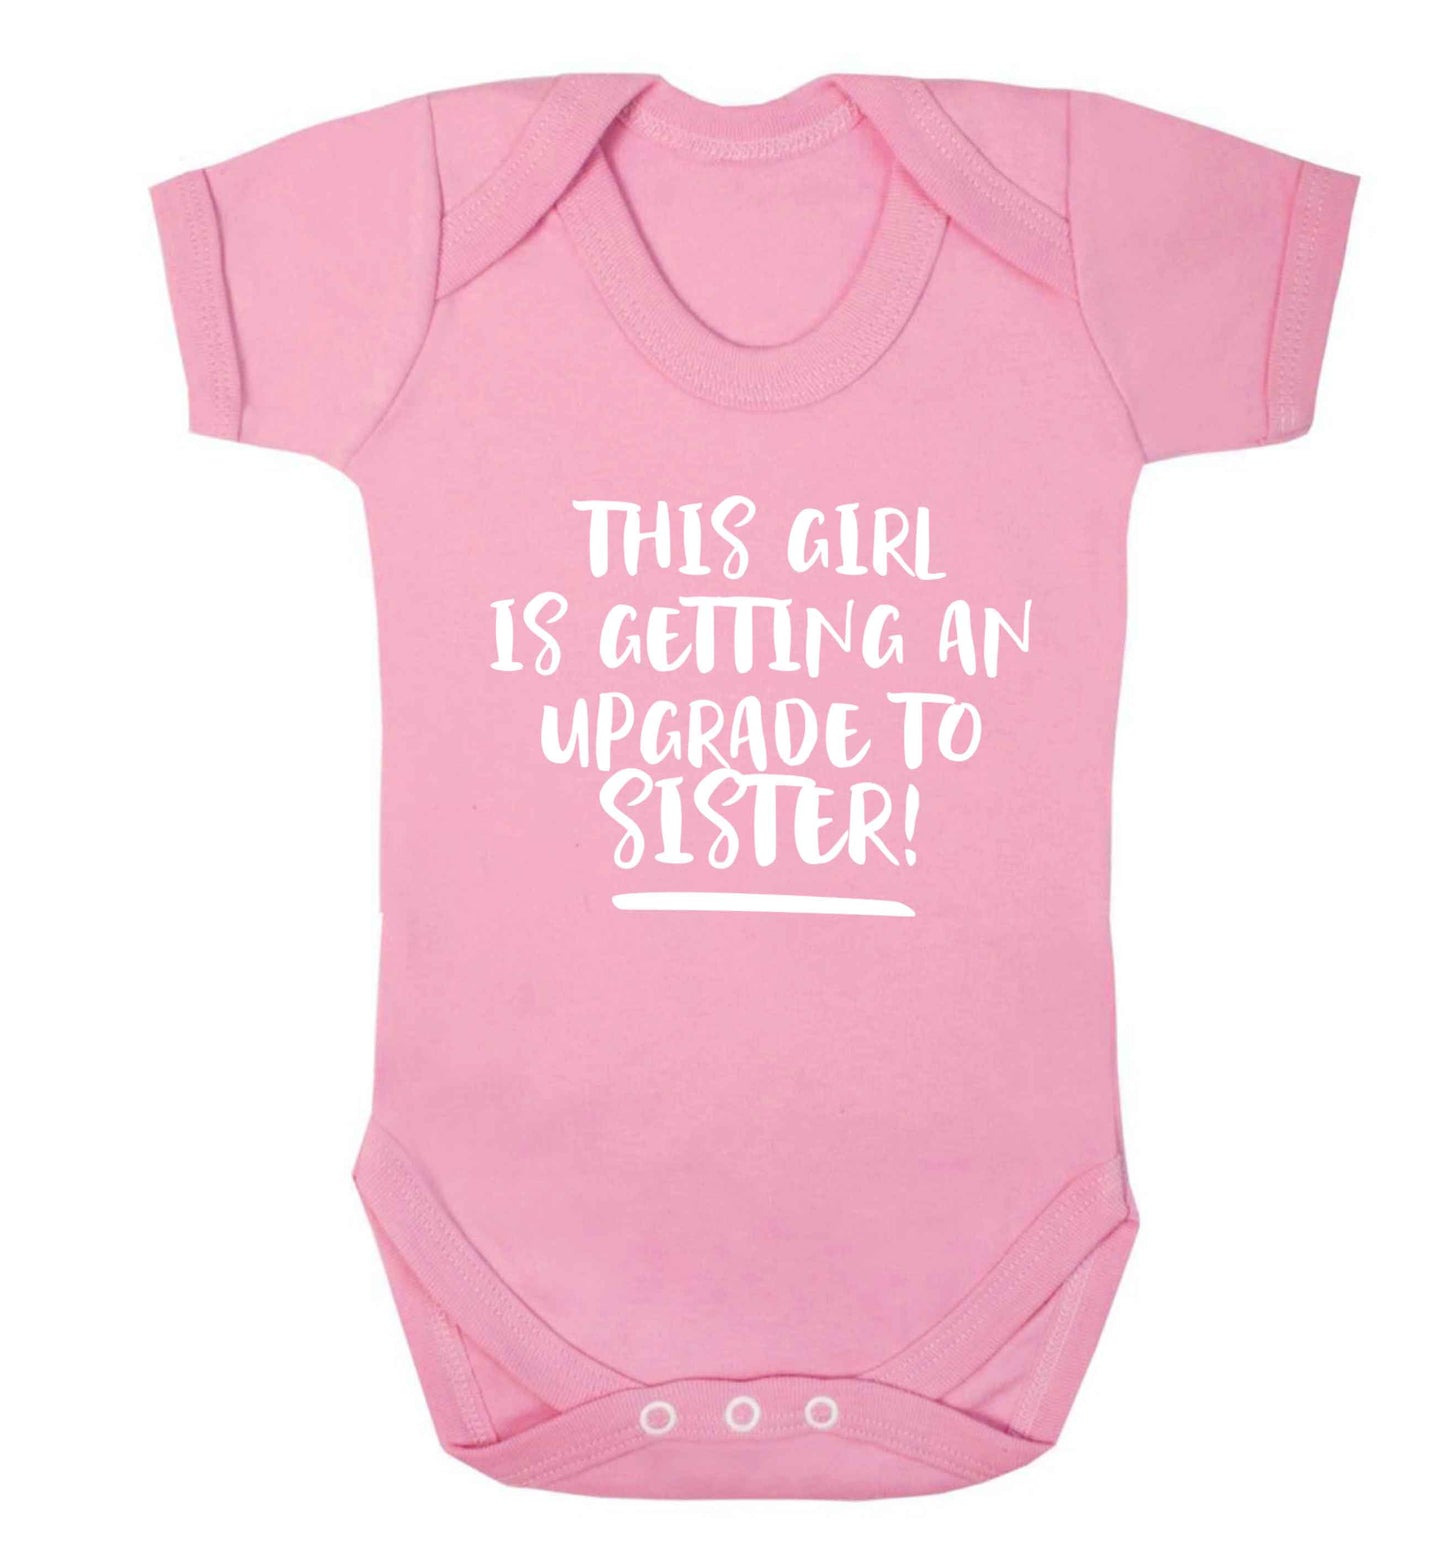 This girl is getting an upgrade to sister! Baby Vest pale pink 18-24 months